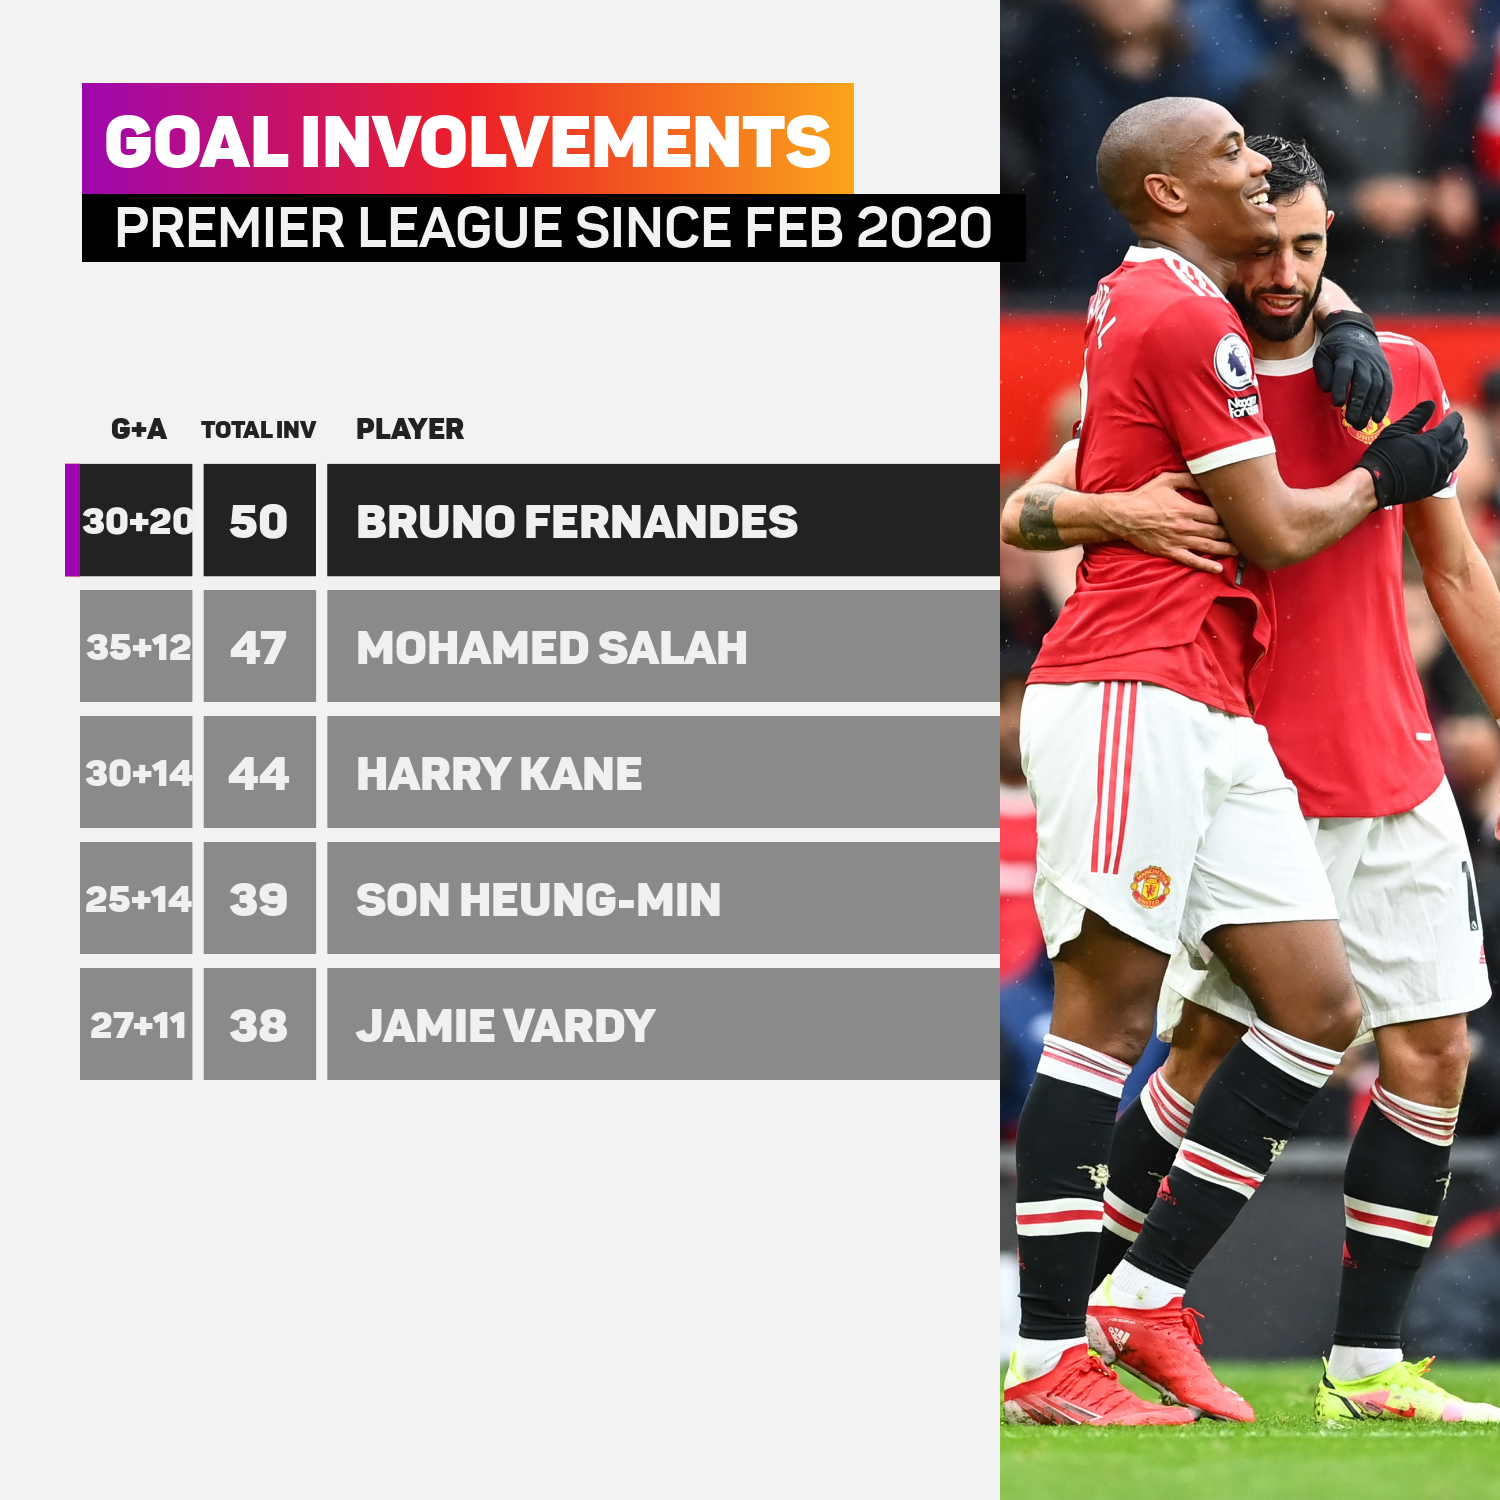 Bruno Fernandes has had more goal involvements than anyone else in the Premier League since his debut